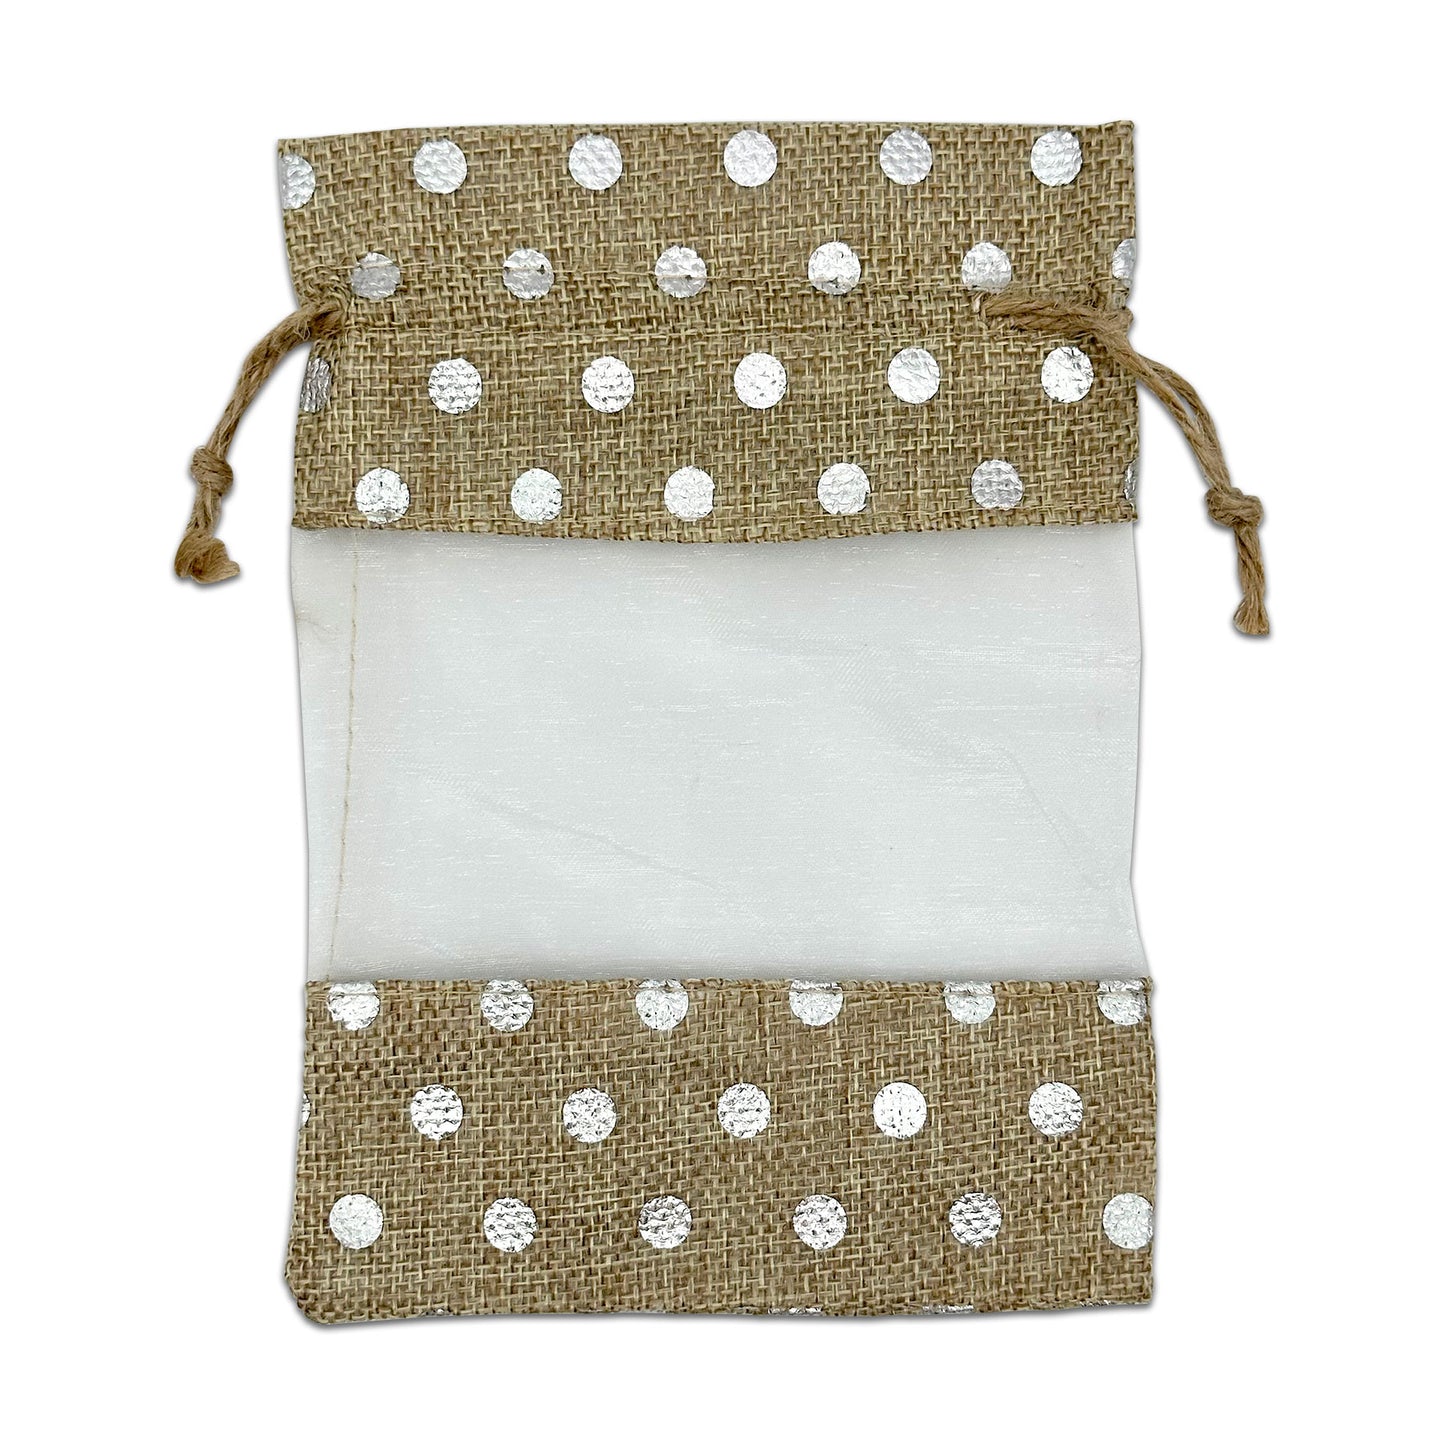 5" x 7" Beige with Silver Polka Dot Linen Burlap and Sheer Organza Gift Bag